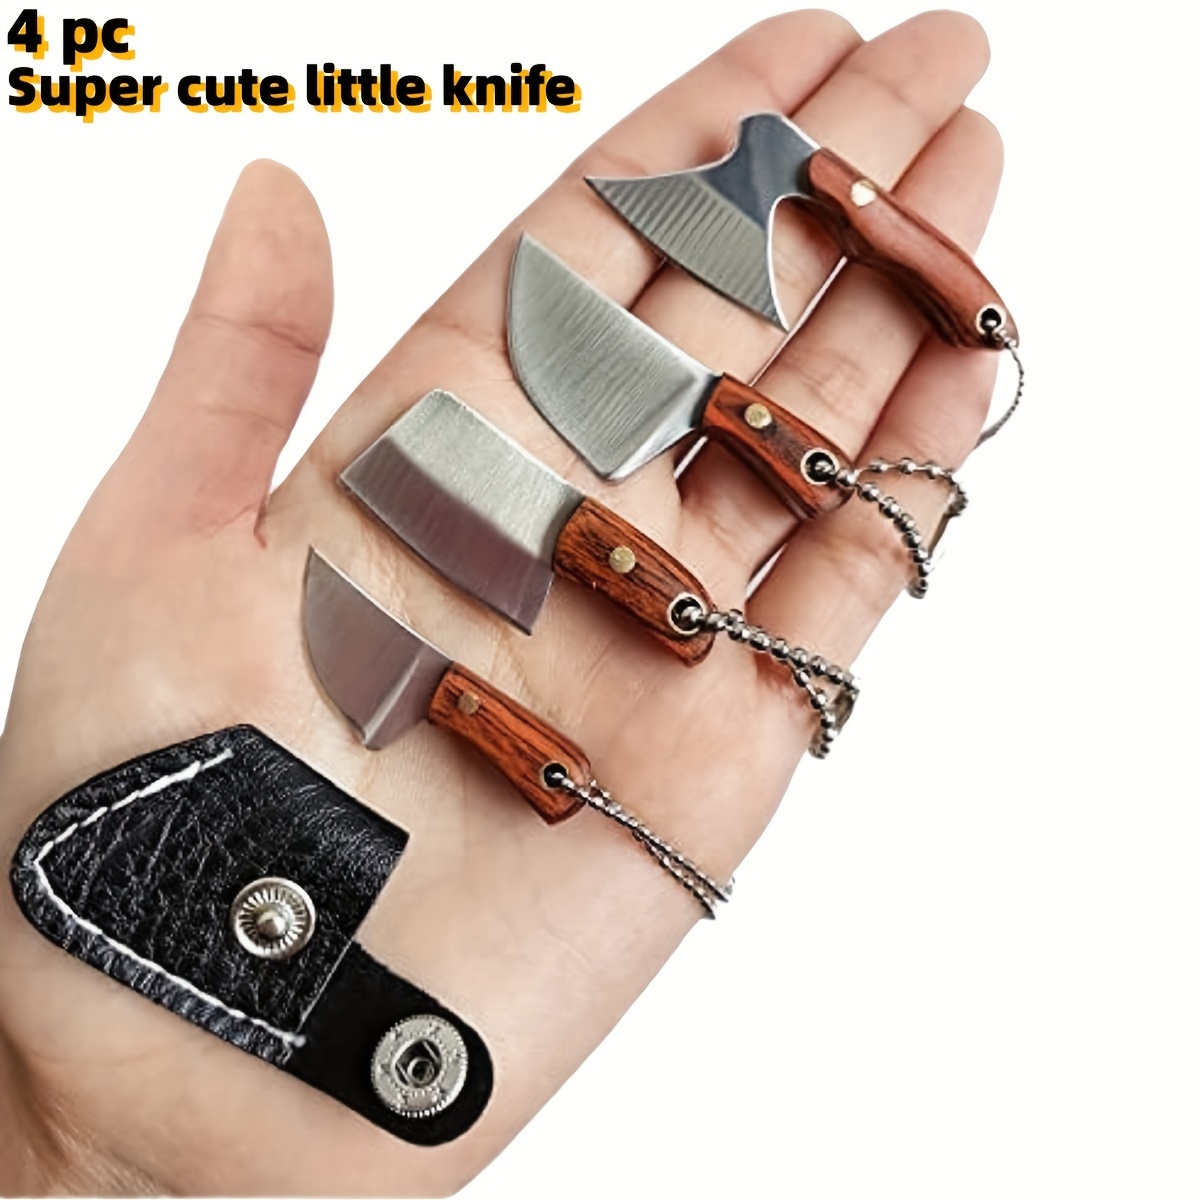 

4pc Super Cute Mini Knife Keychain Knife As A Great Gift For Girlfriends